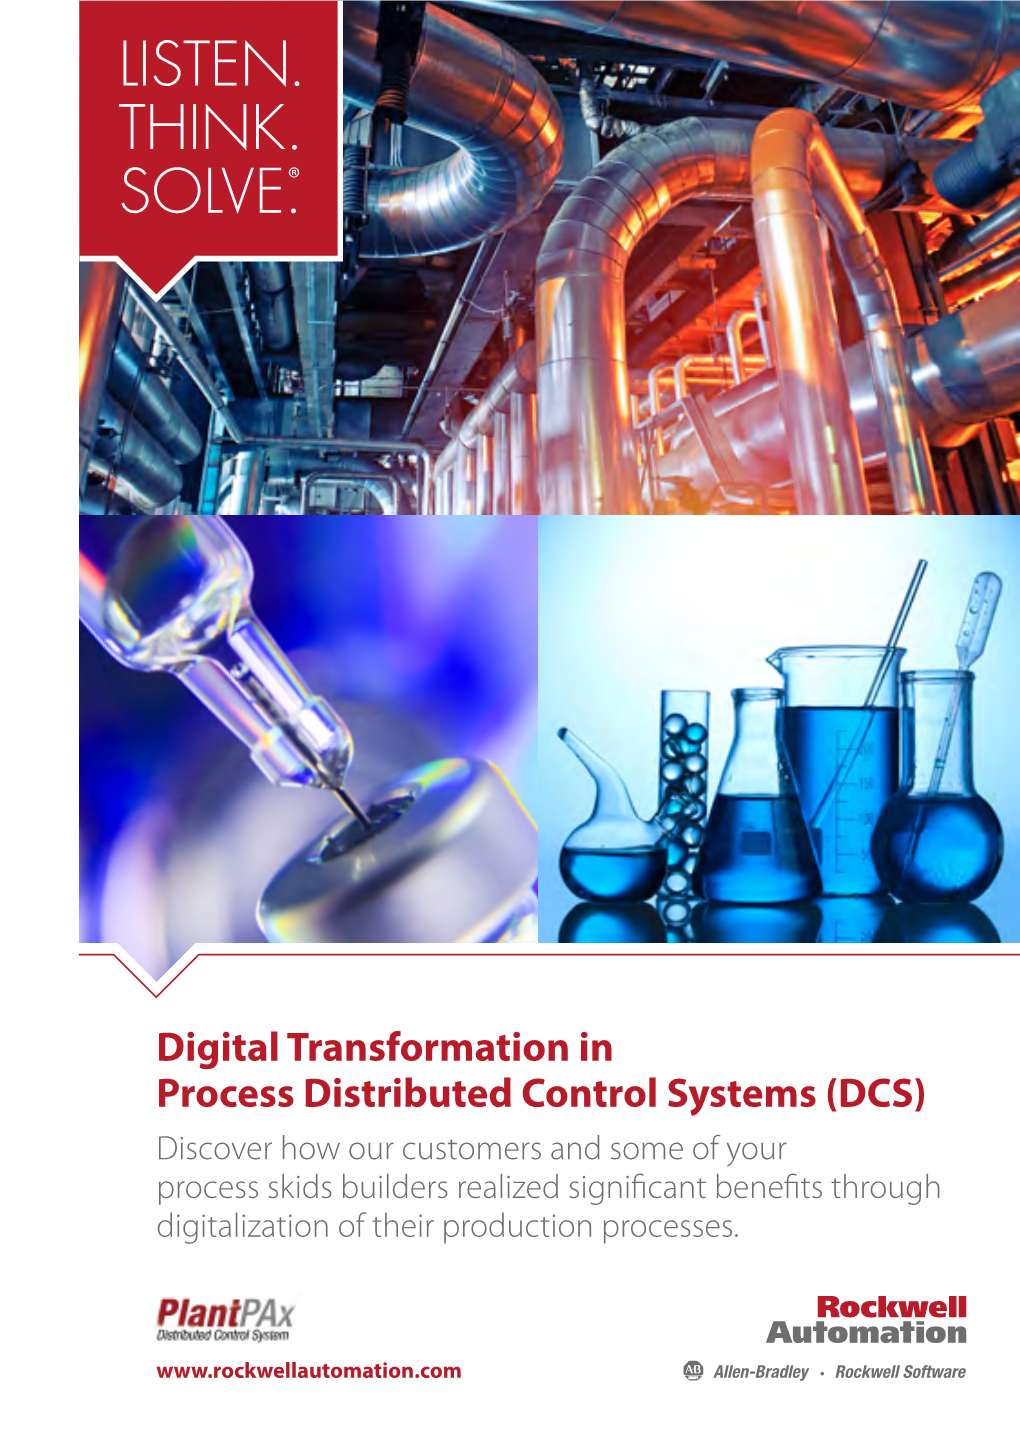 Digital Transformation in Process Distributed Control Systems (DCS)